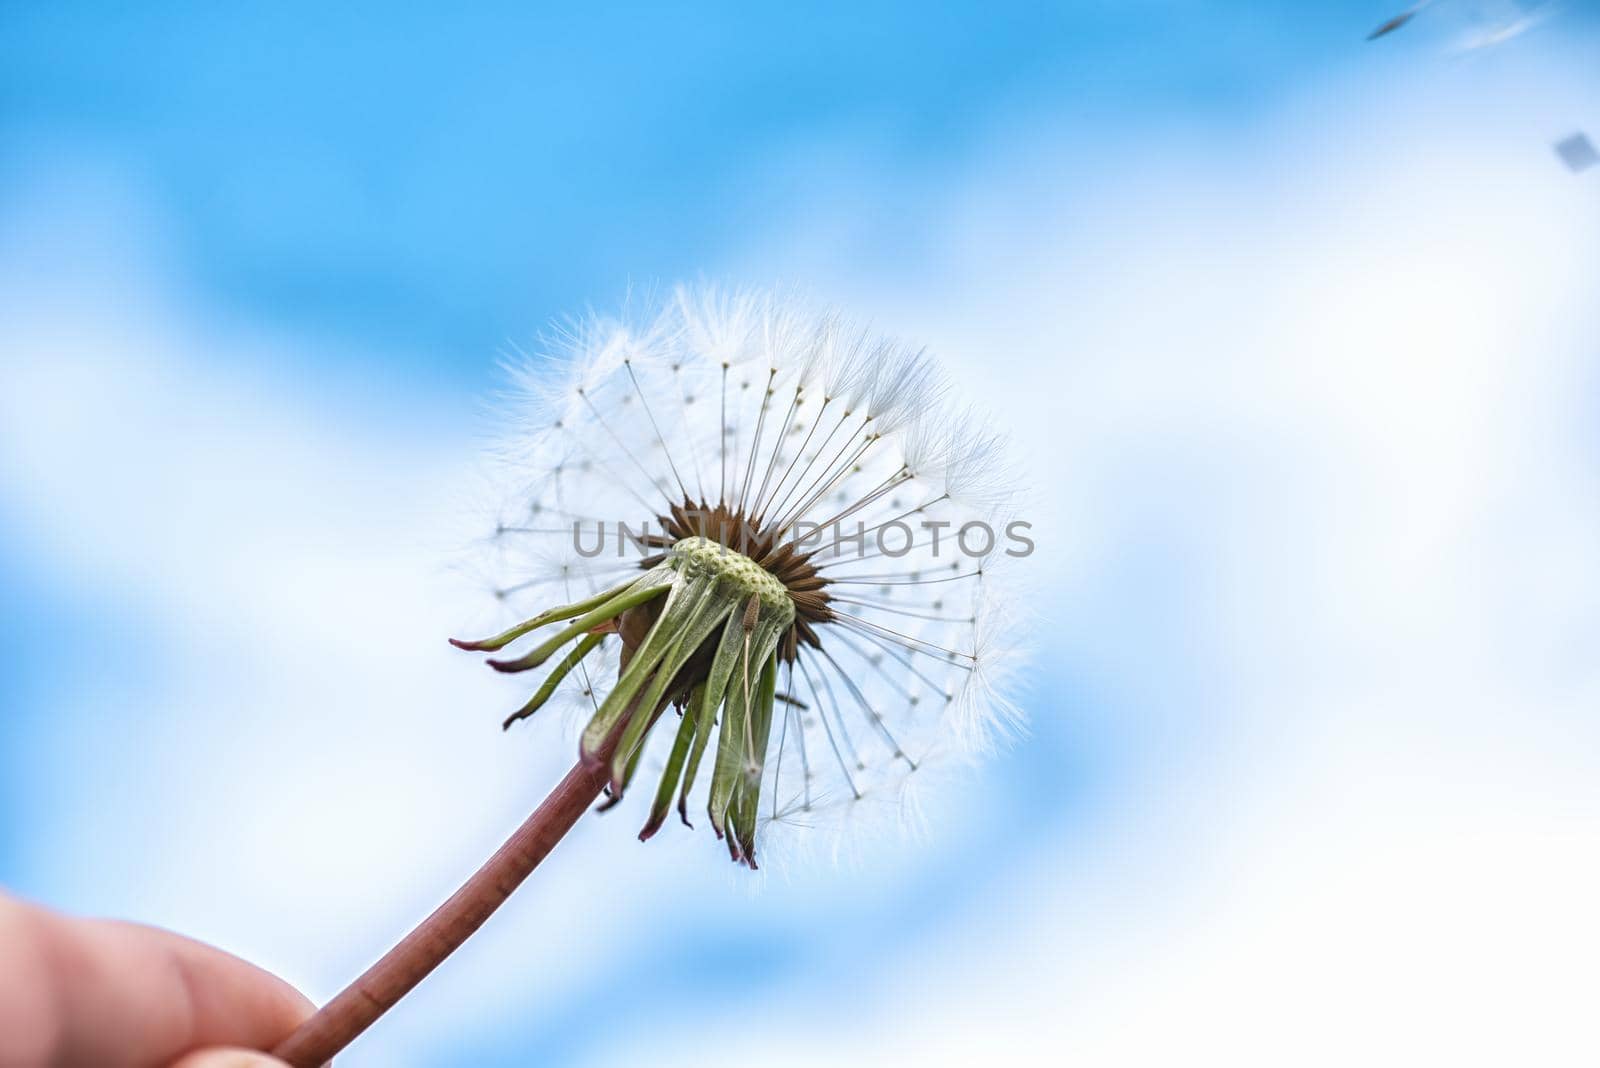 Dandelion with seeds blowing away in the wind across a blue sky by Estival